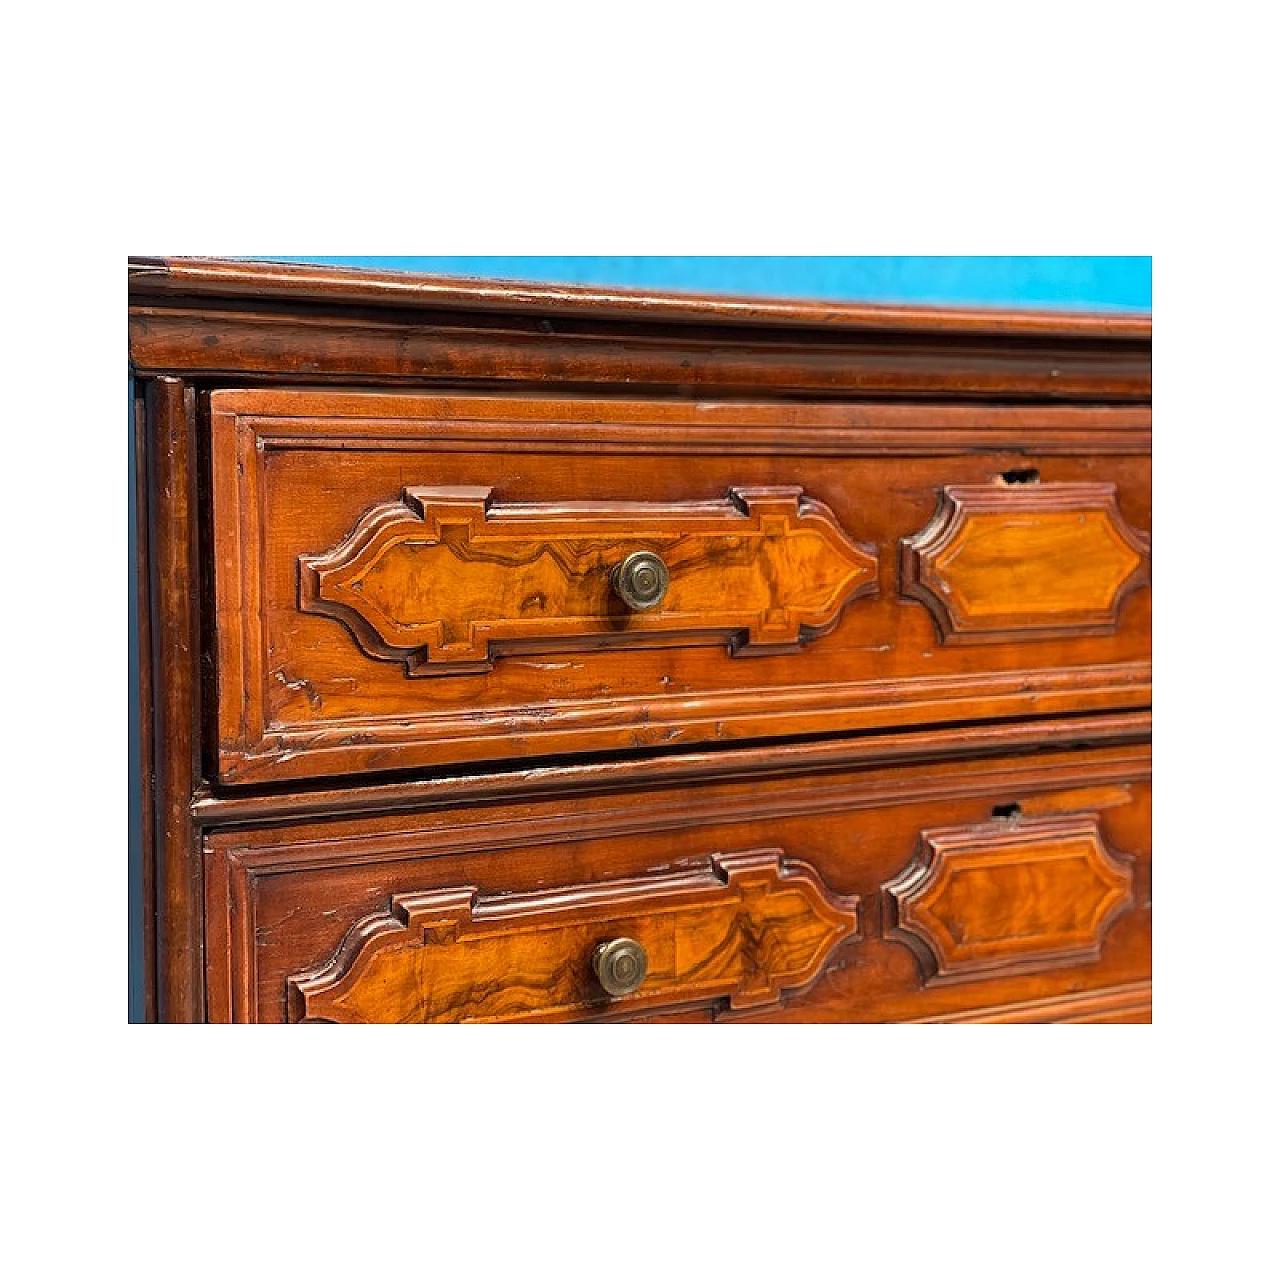 Lombardy chest of drawers in cherry wood, late 18th century 5